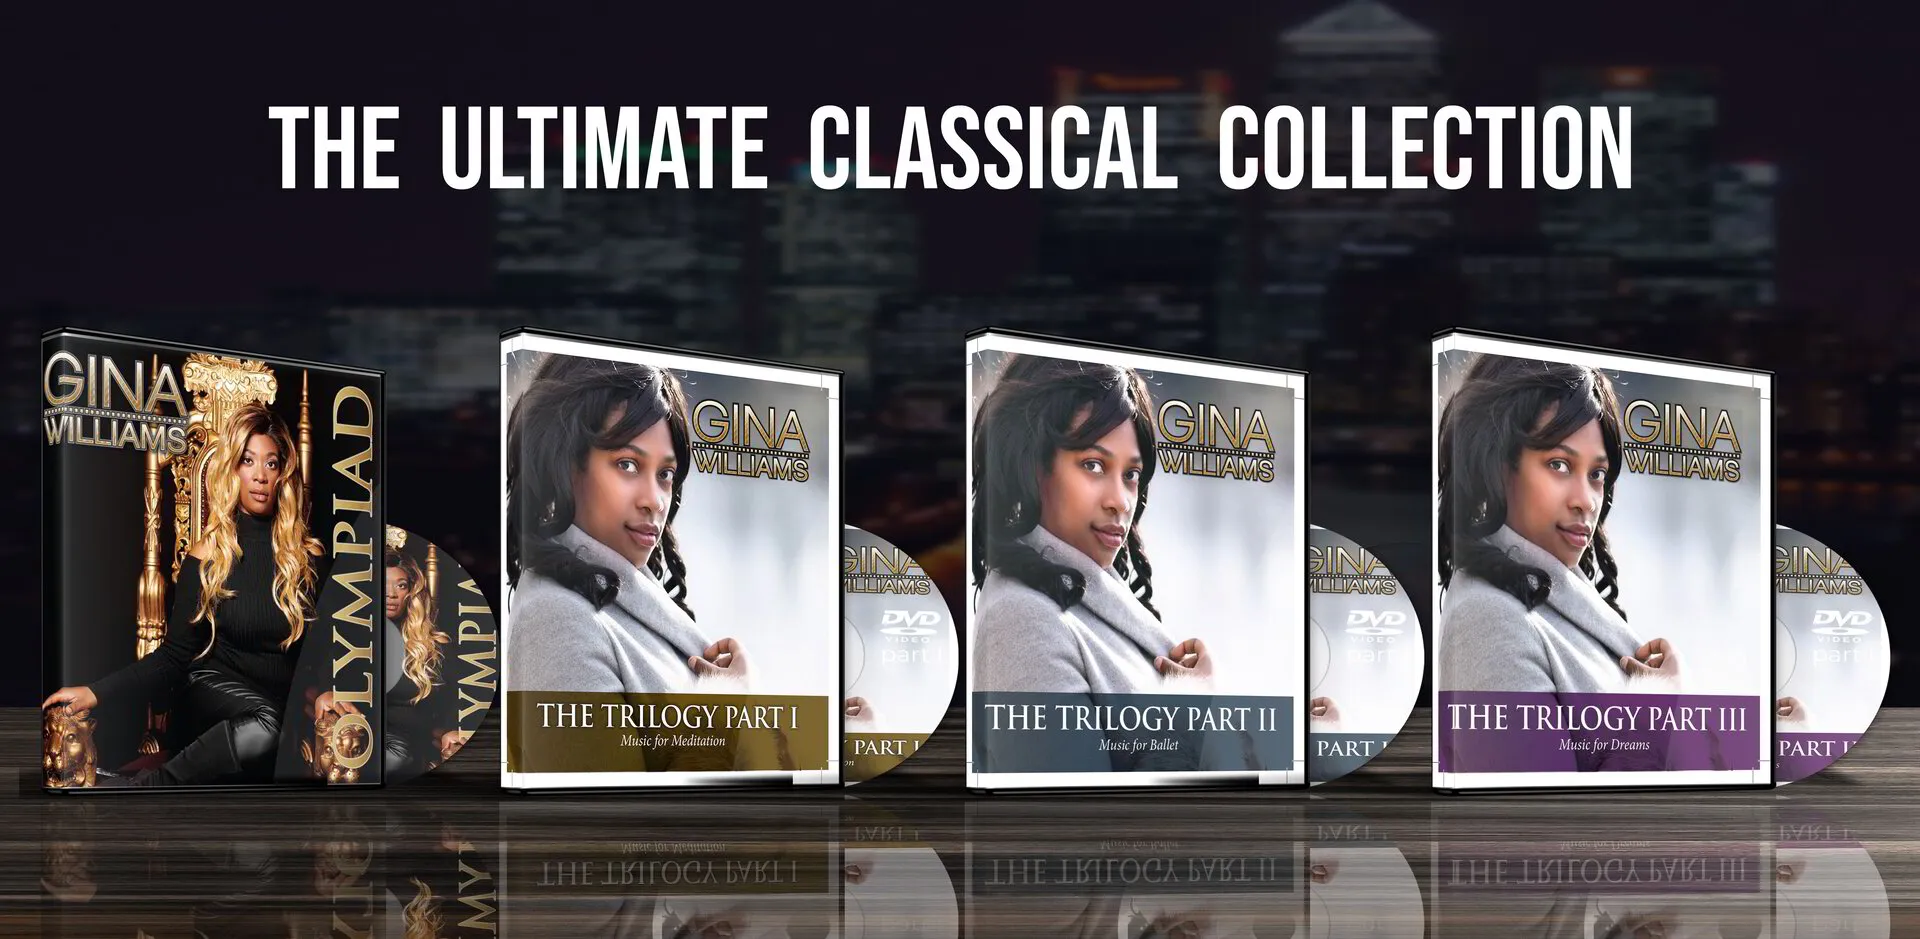 The Ultimate Classical Physical Collection